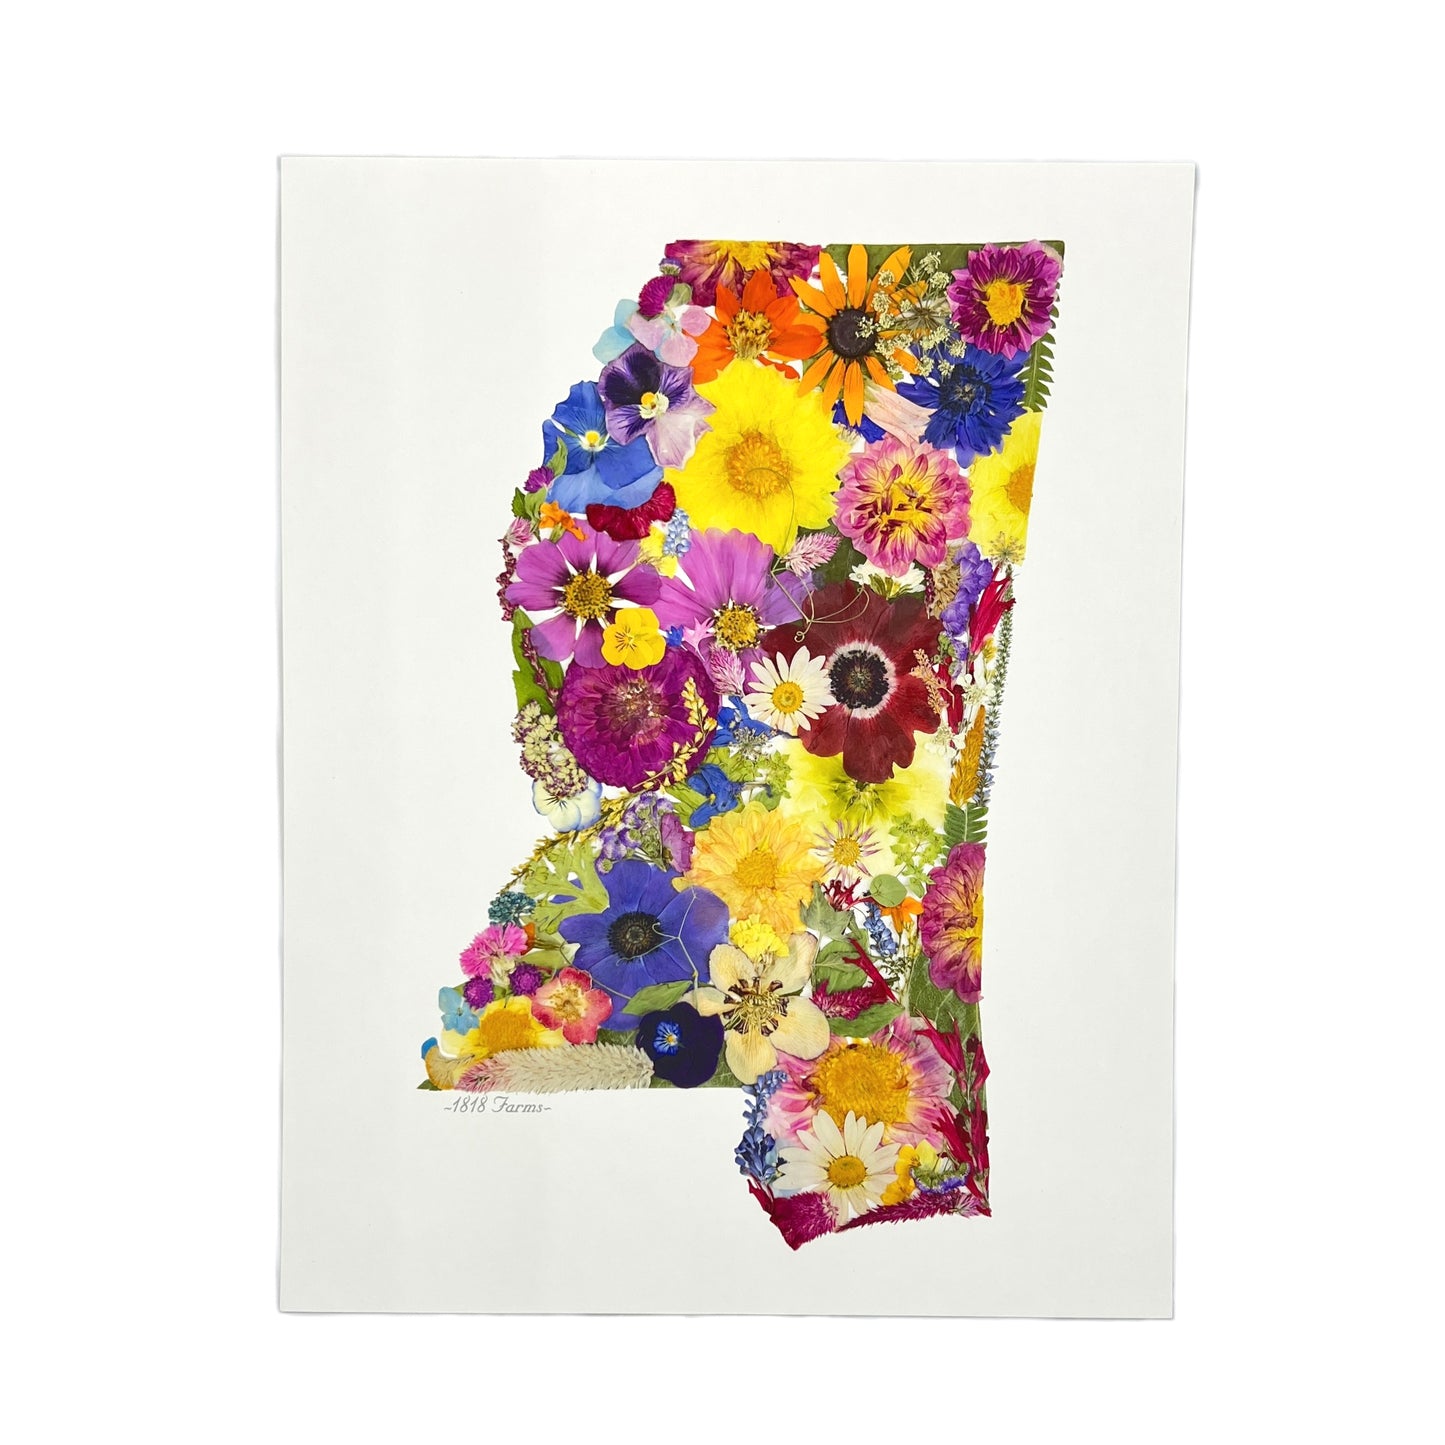 Mississippi Themed Giclée Print Featuring Dried, Pressed Flowers - "Where I Bloom" Collection Giclee Art Print 1818 Farms 8"x10"  